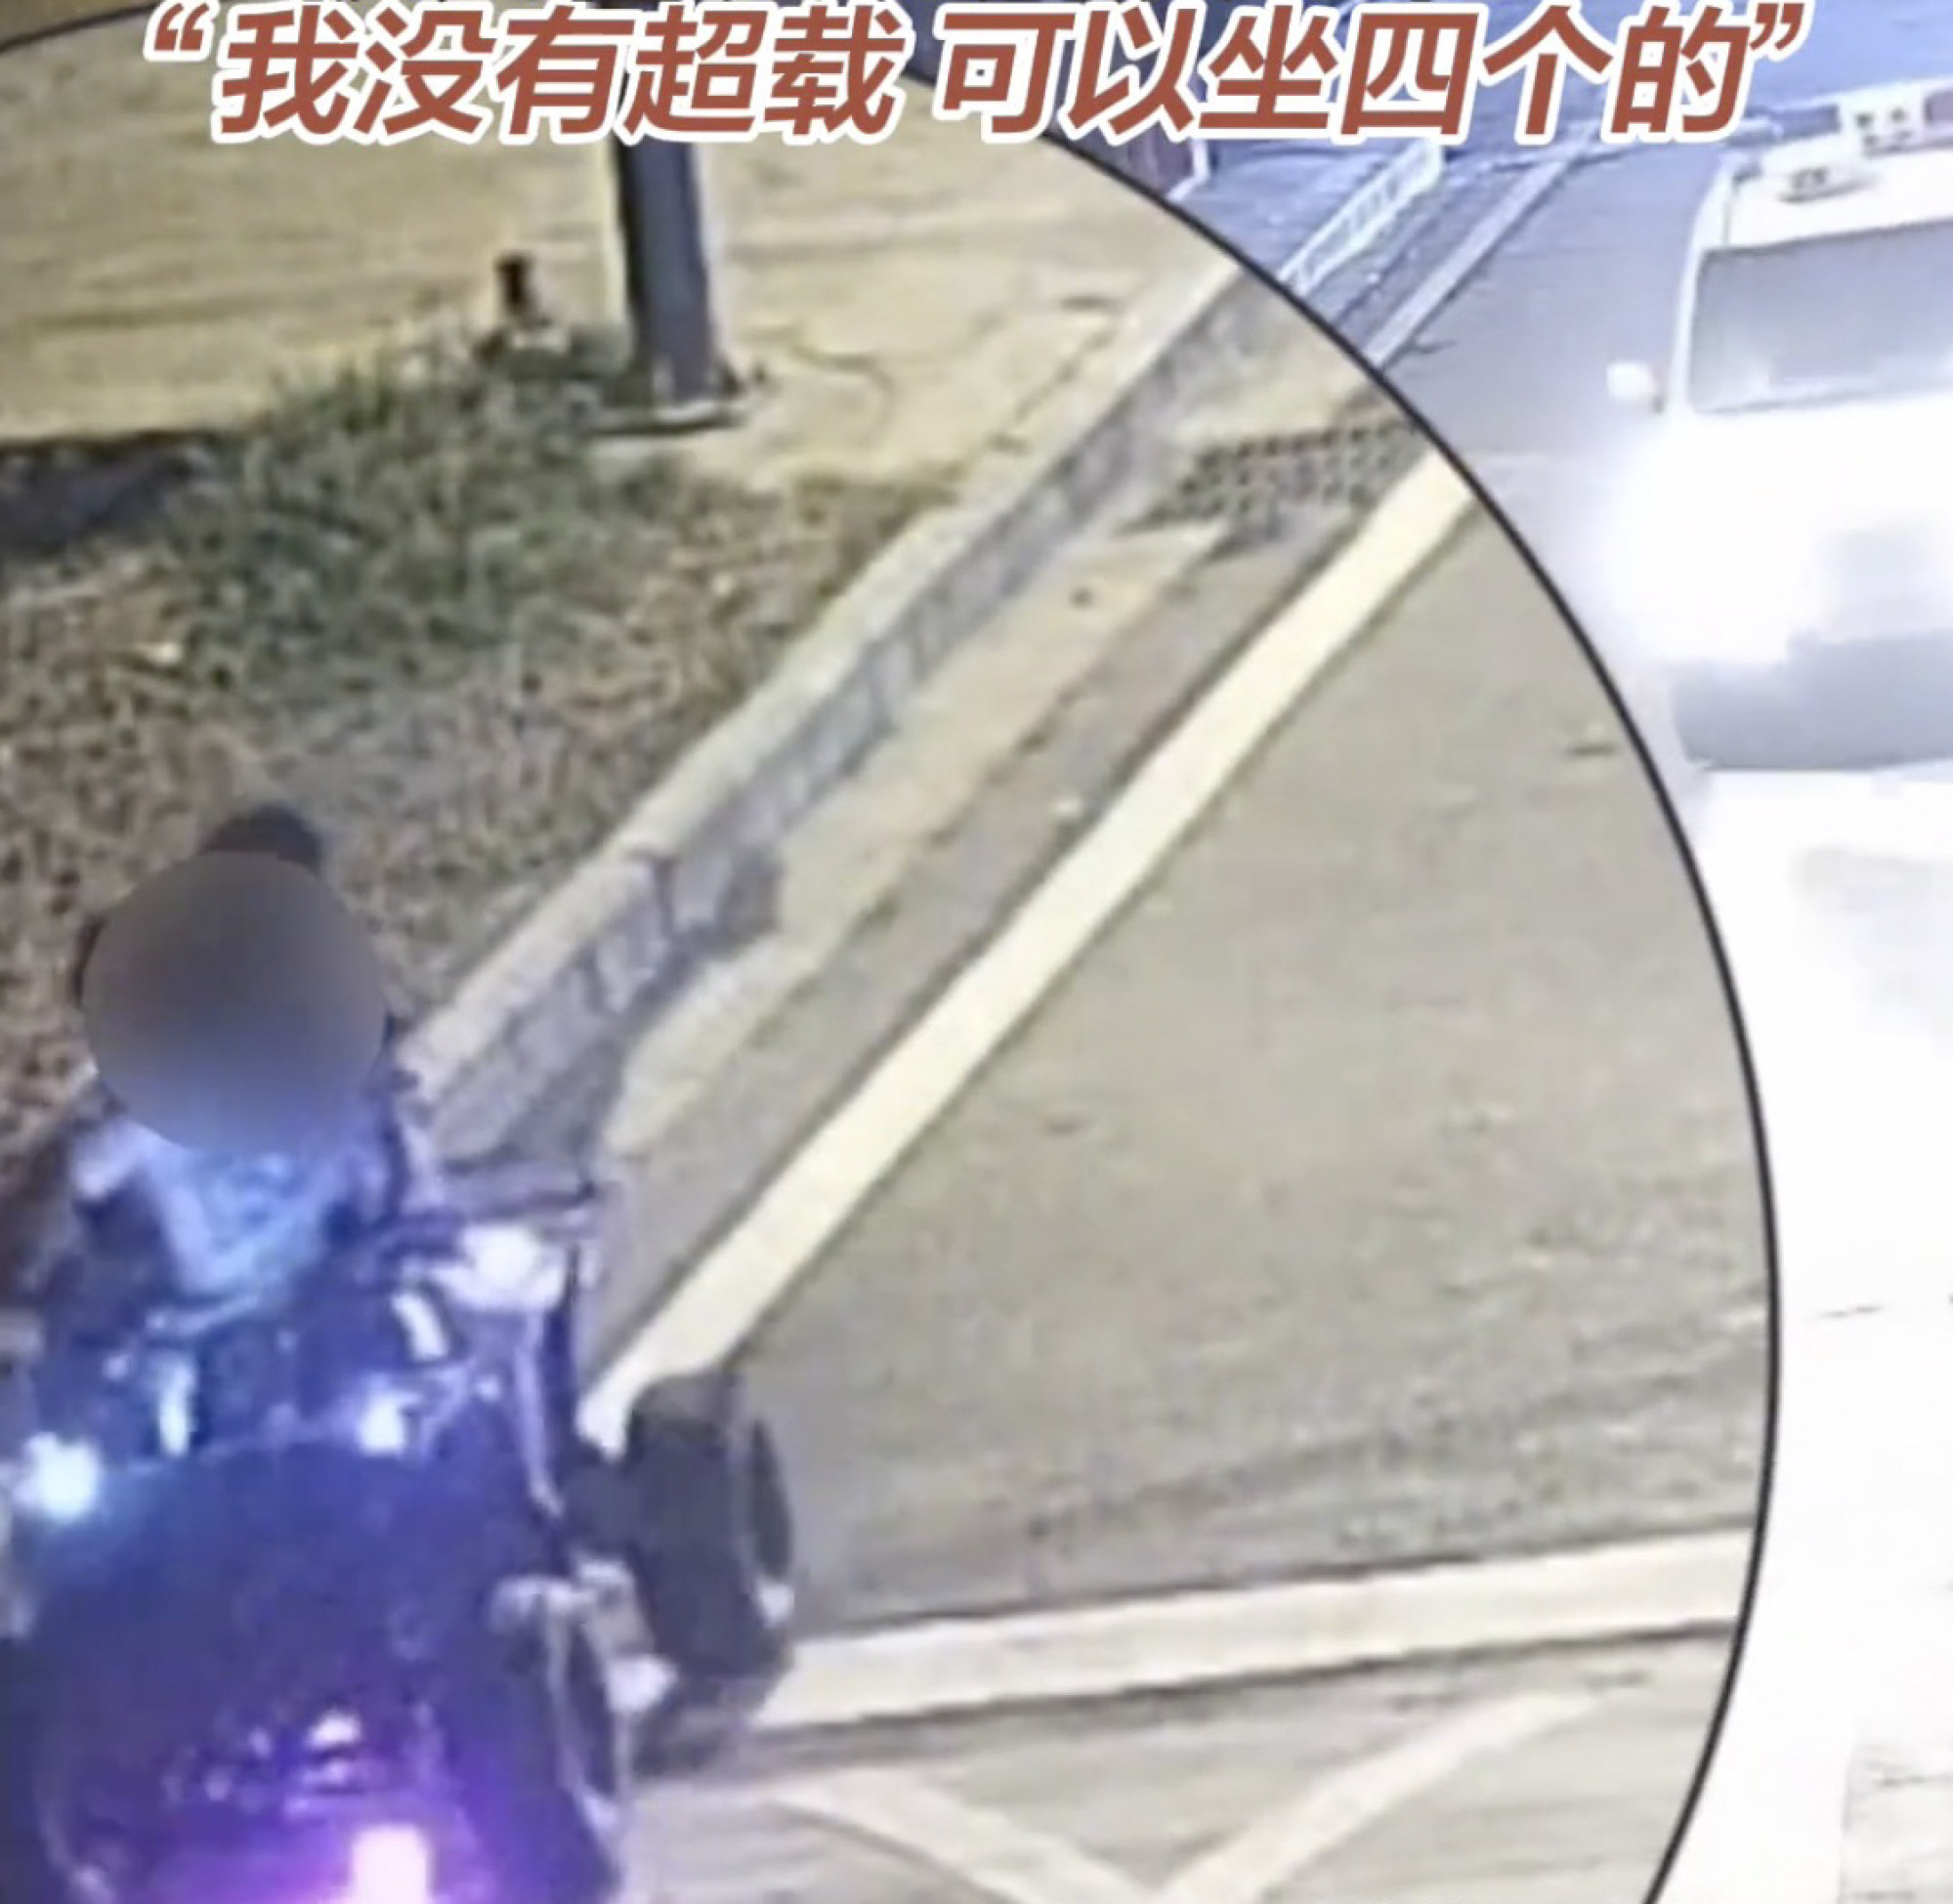 Surveillance footage captures the children in the toy car being followed by a police vehicle. Photo: Douyin